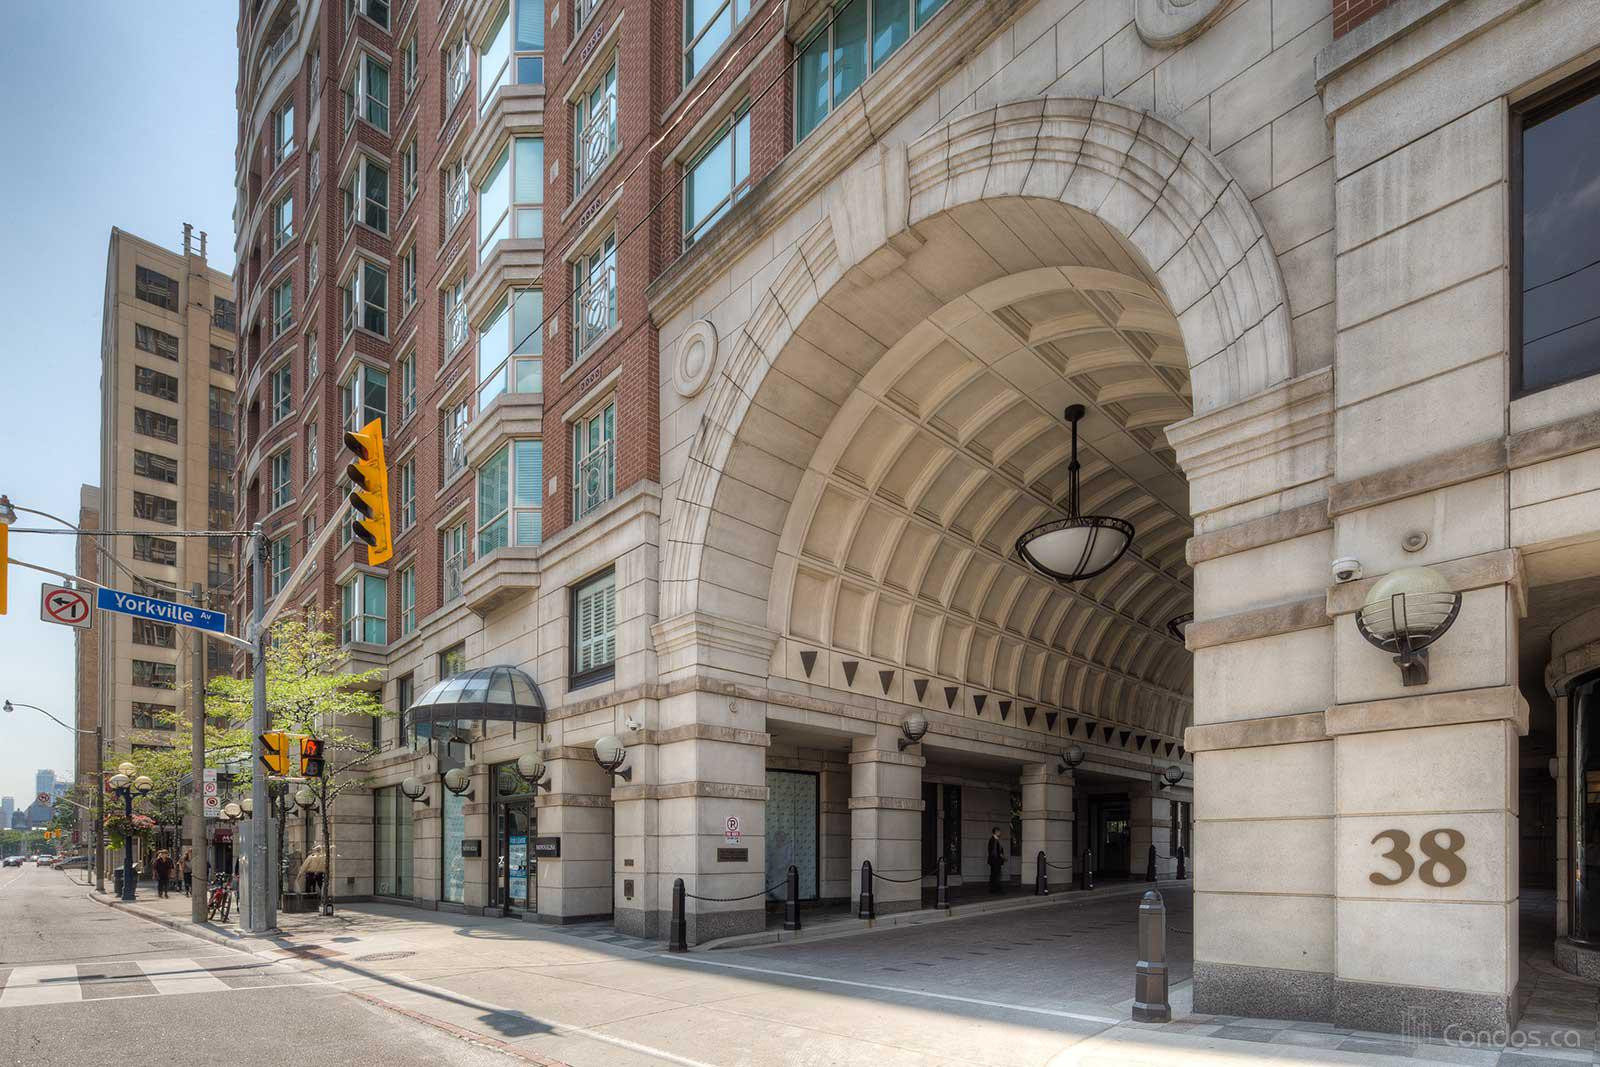 The Prince Arthur Luxury Condo in Yorkville showing exterior